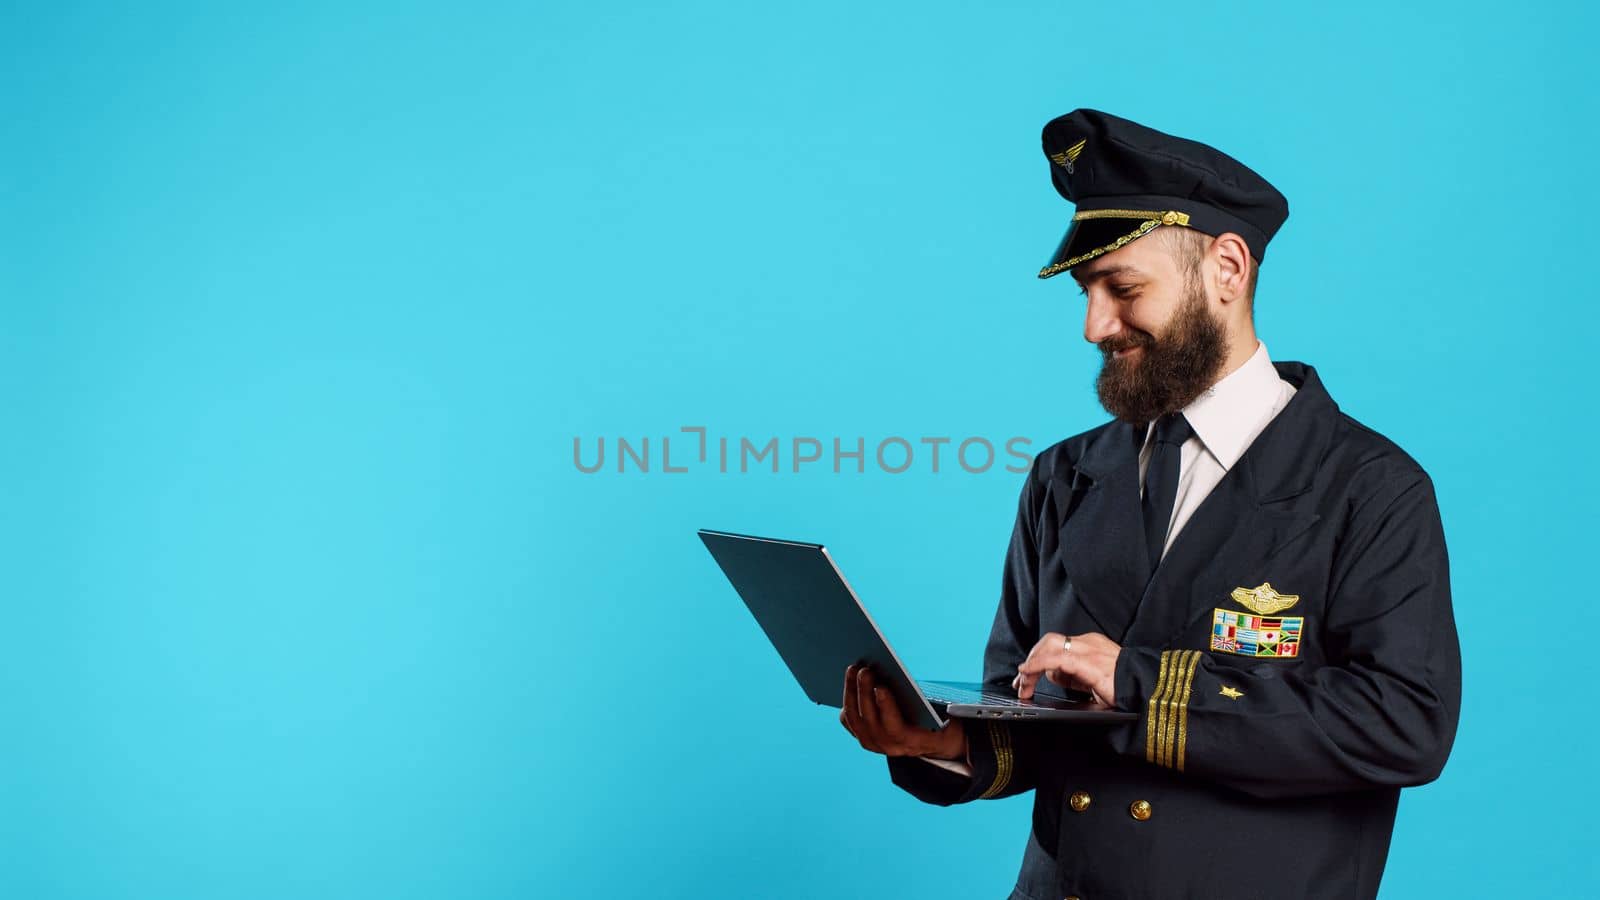 Modern aircrew captain using laptop on camera, browsing online website and social media app. Male pilot working on commercial flights and holding wireless computer, navigating internet.